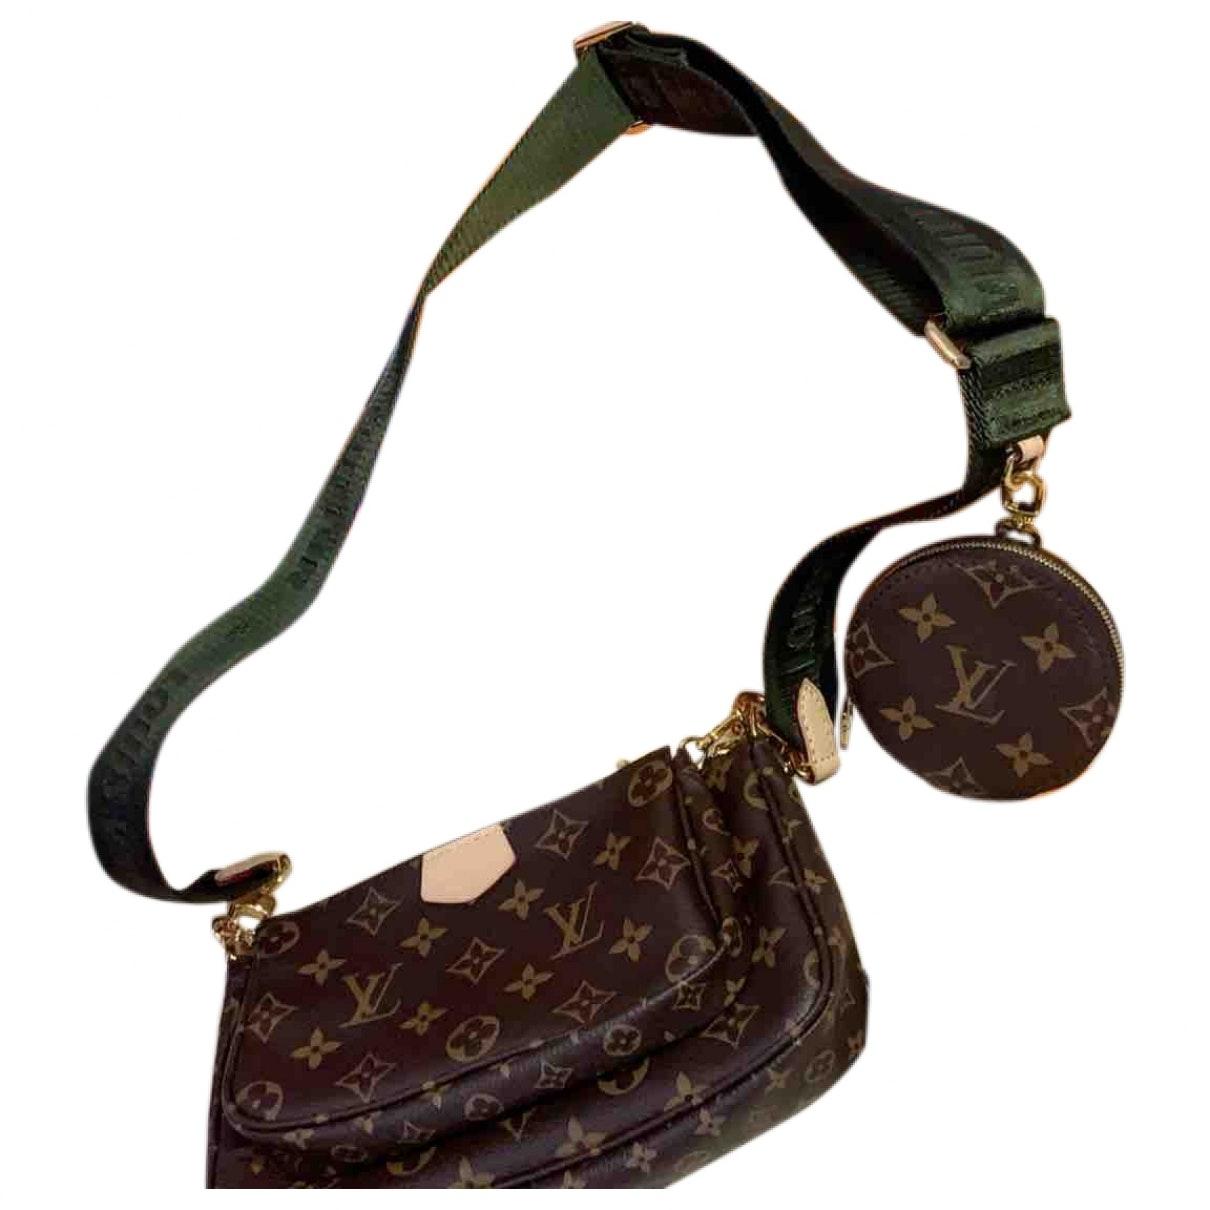 Louis Vuitton Pochette  Buy or Sell your LV accessories - Vestiaire  Collective